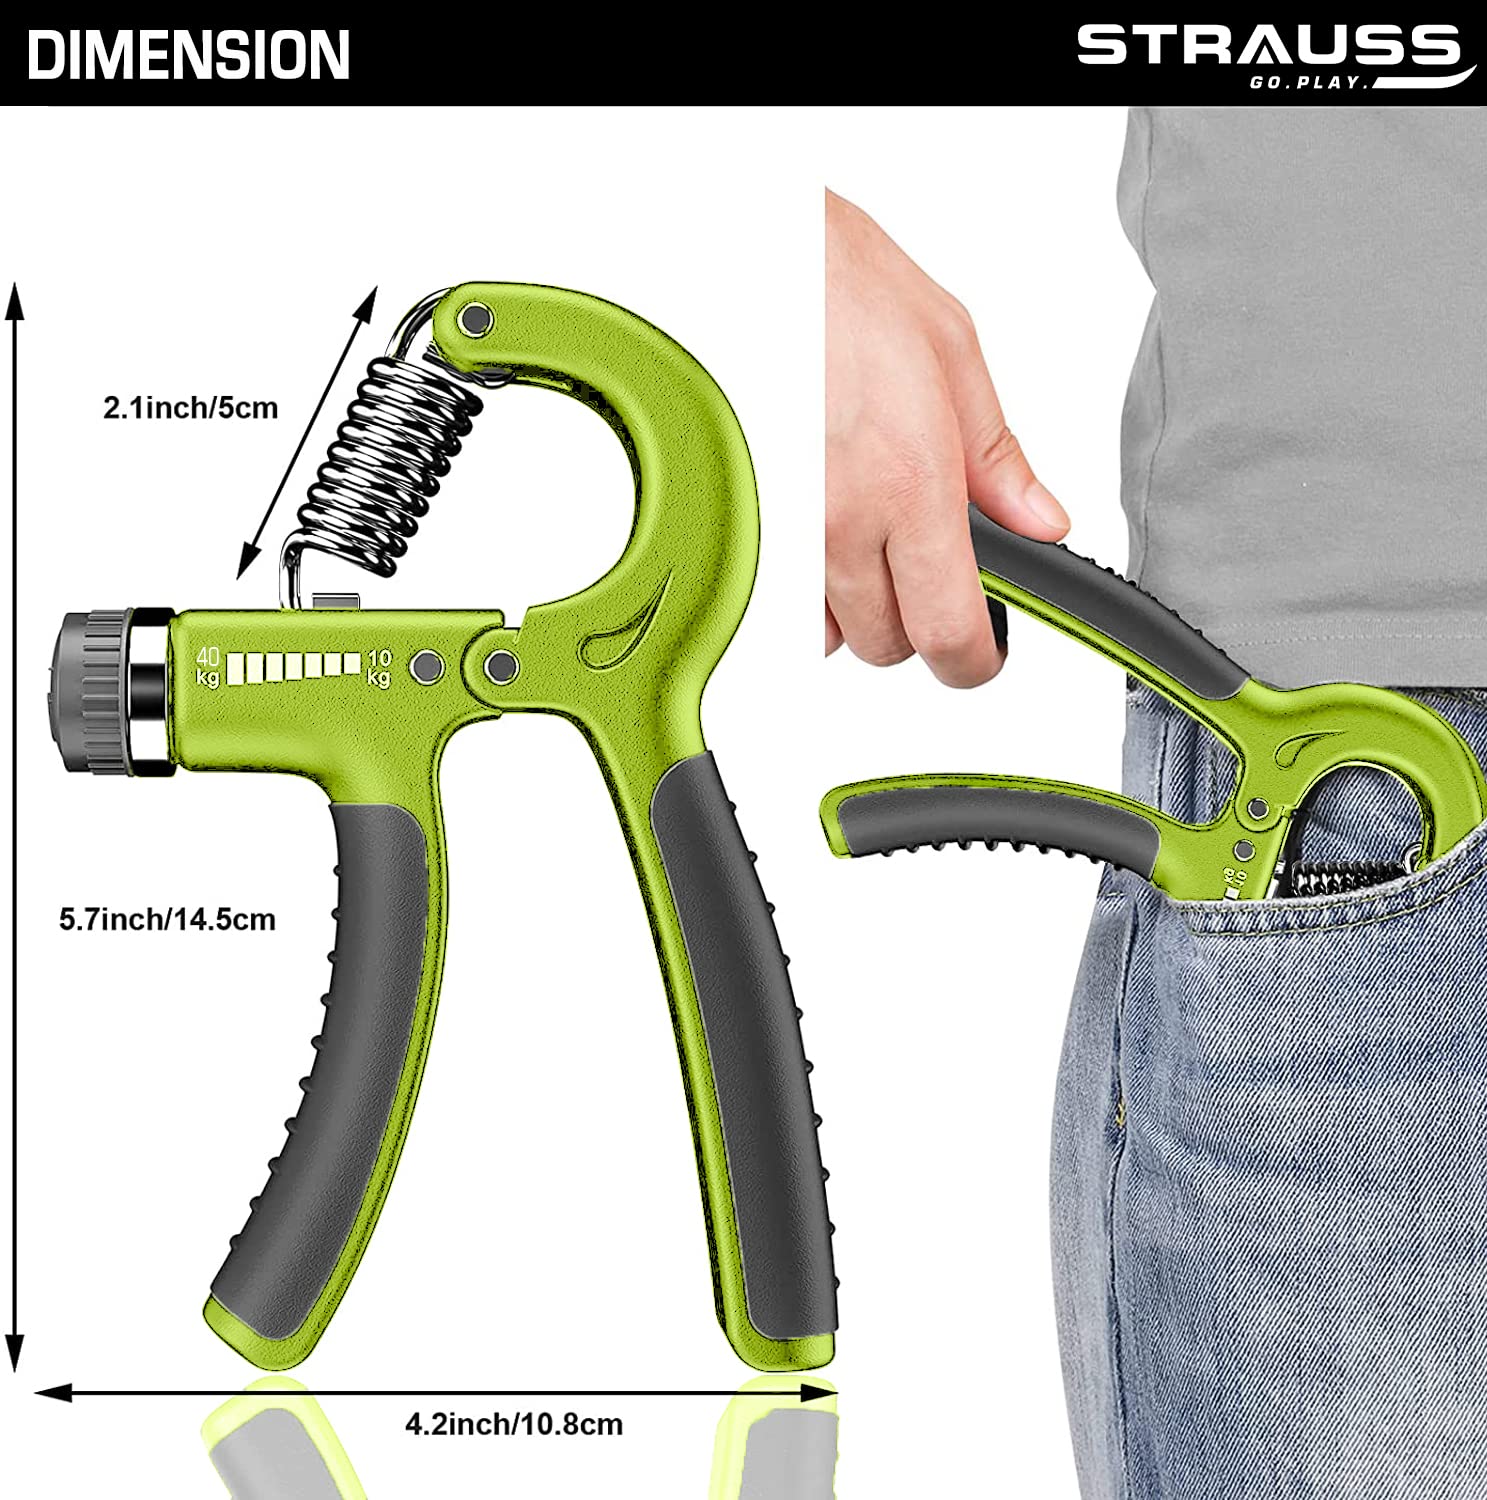 Strauss Adjustable Hand Grip| Adjustable Resistance (10KG - 40KG) | Hand/Power Gripper for Home & Gym Workouts | Perfect for Finger & Forearm Hand Exercises & Strength Building for Men & Women (Black/Green)